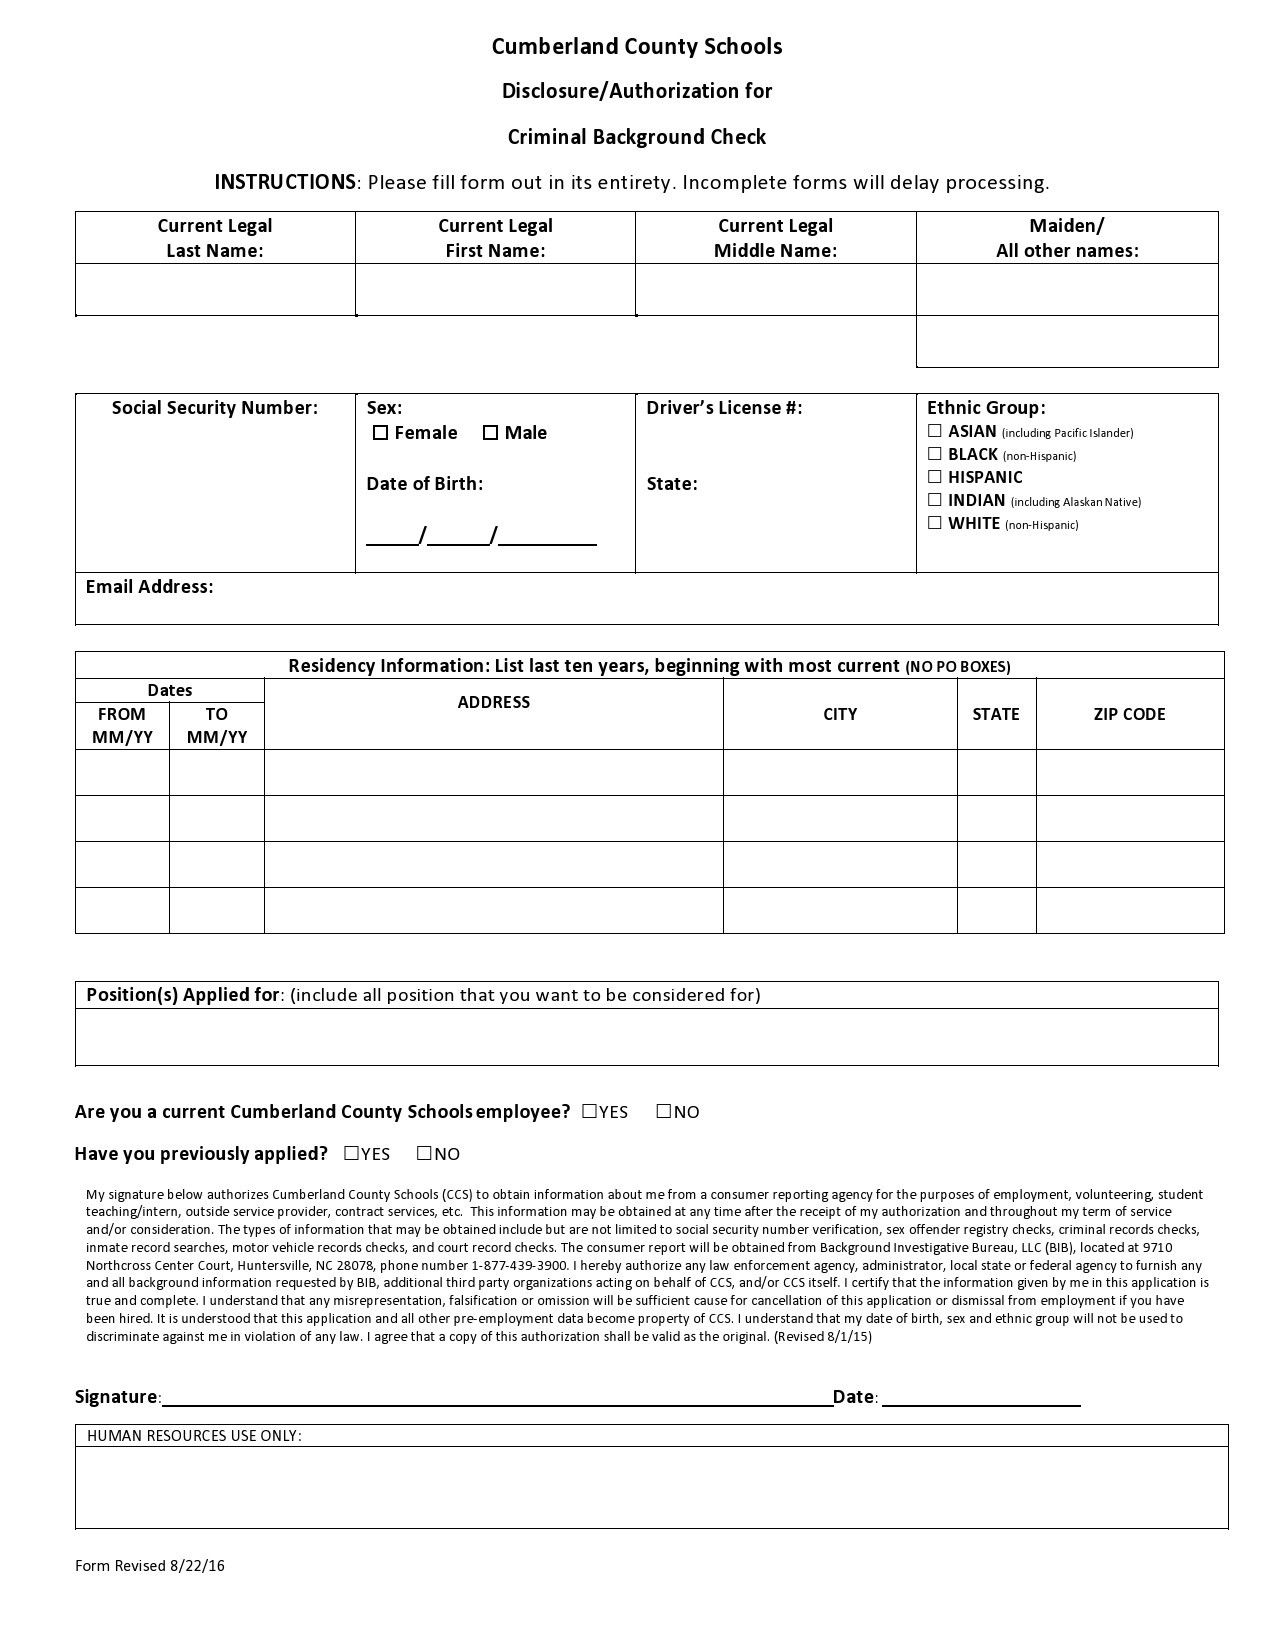 47 Free Background Check Authorization Forms TemplateLab